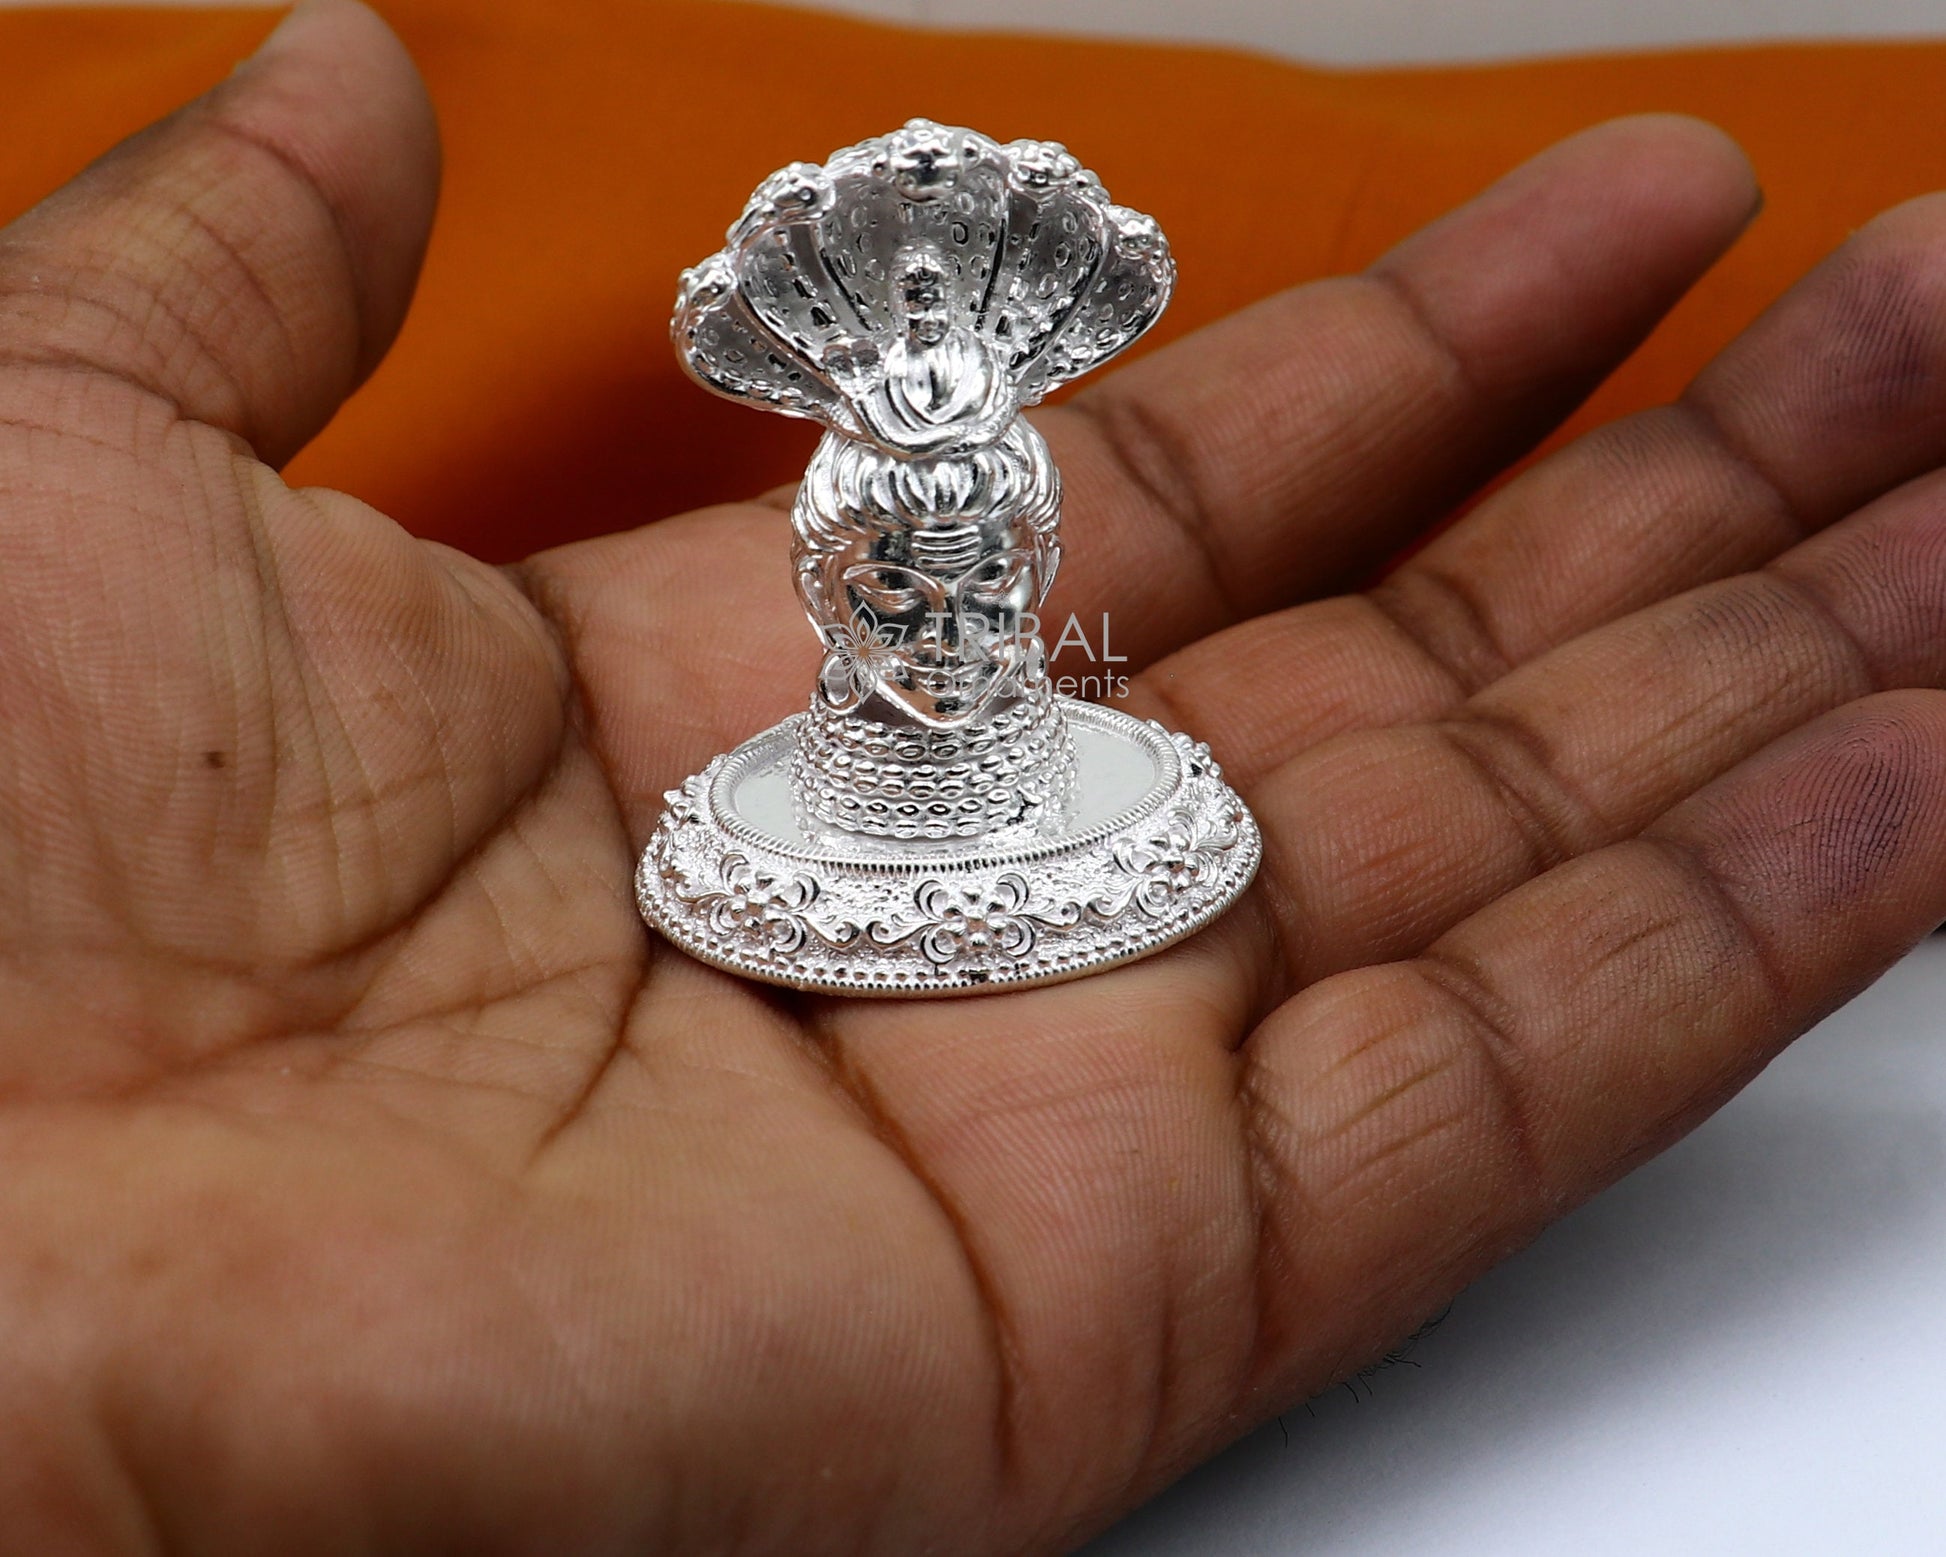 925 Sterling silver handmade hindu Lord Shiva with snake divine statue figurine, puja articles best gift silver sculpture article art600 - TRIBAL ORNAMENTS